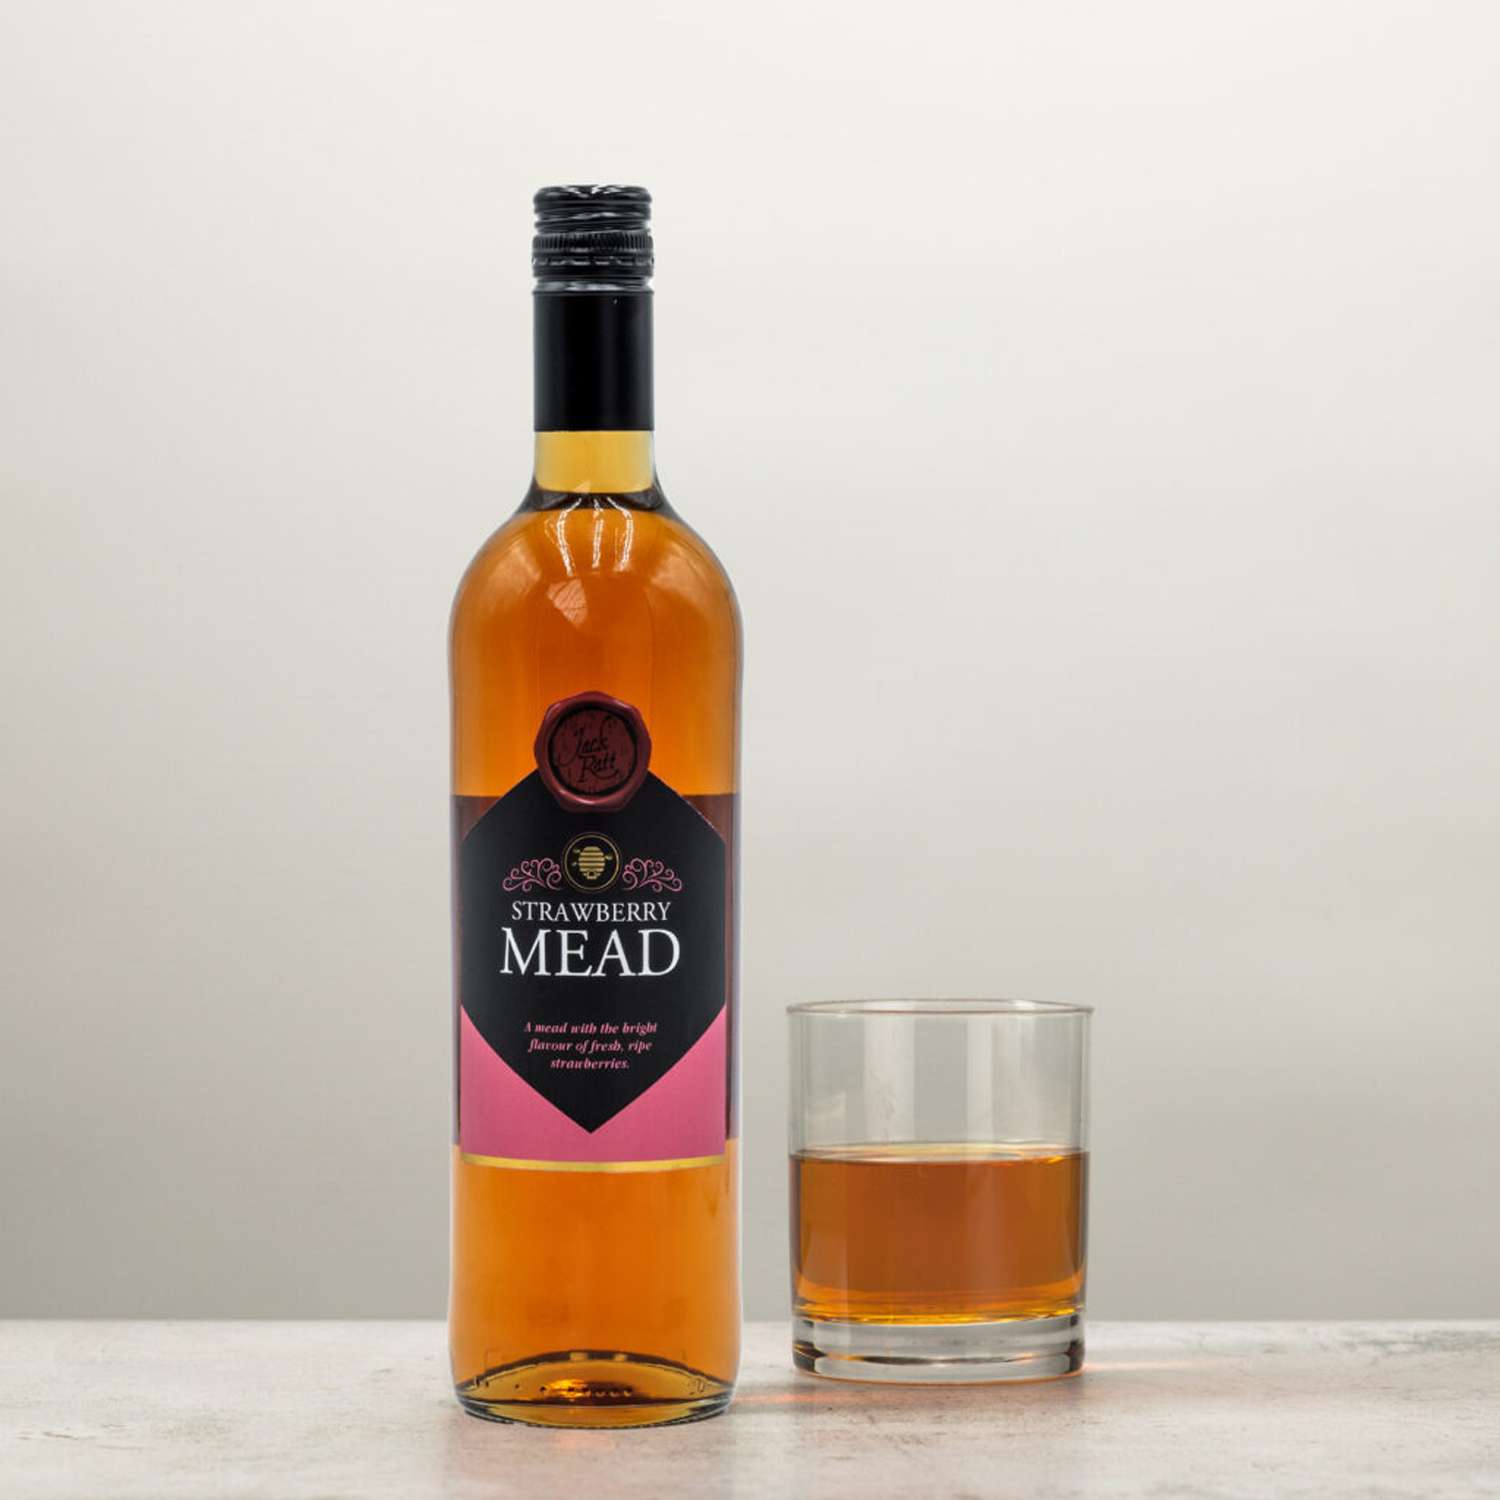 Lyme Bay Strawberry Mead